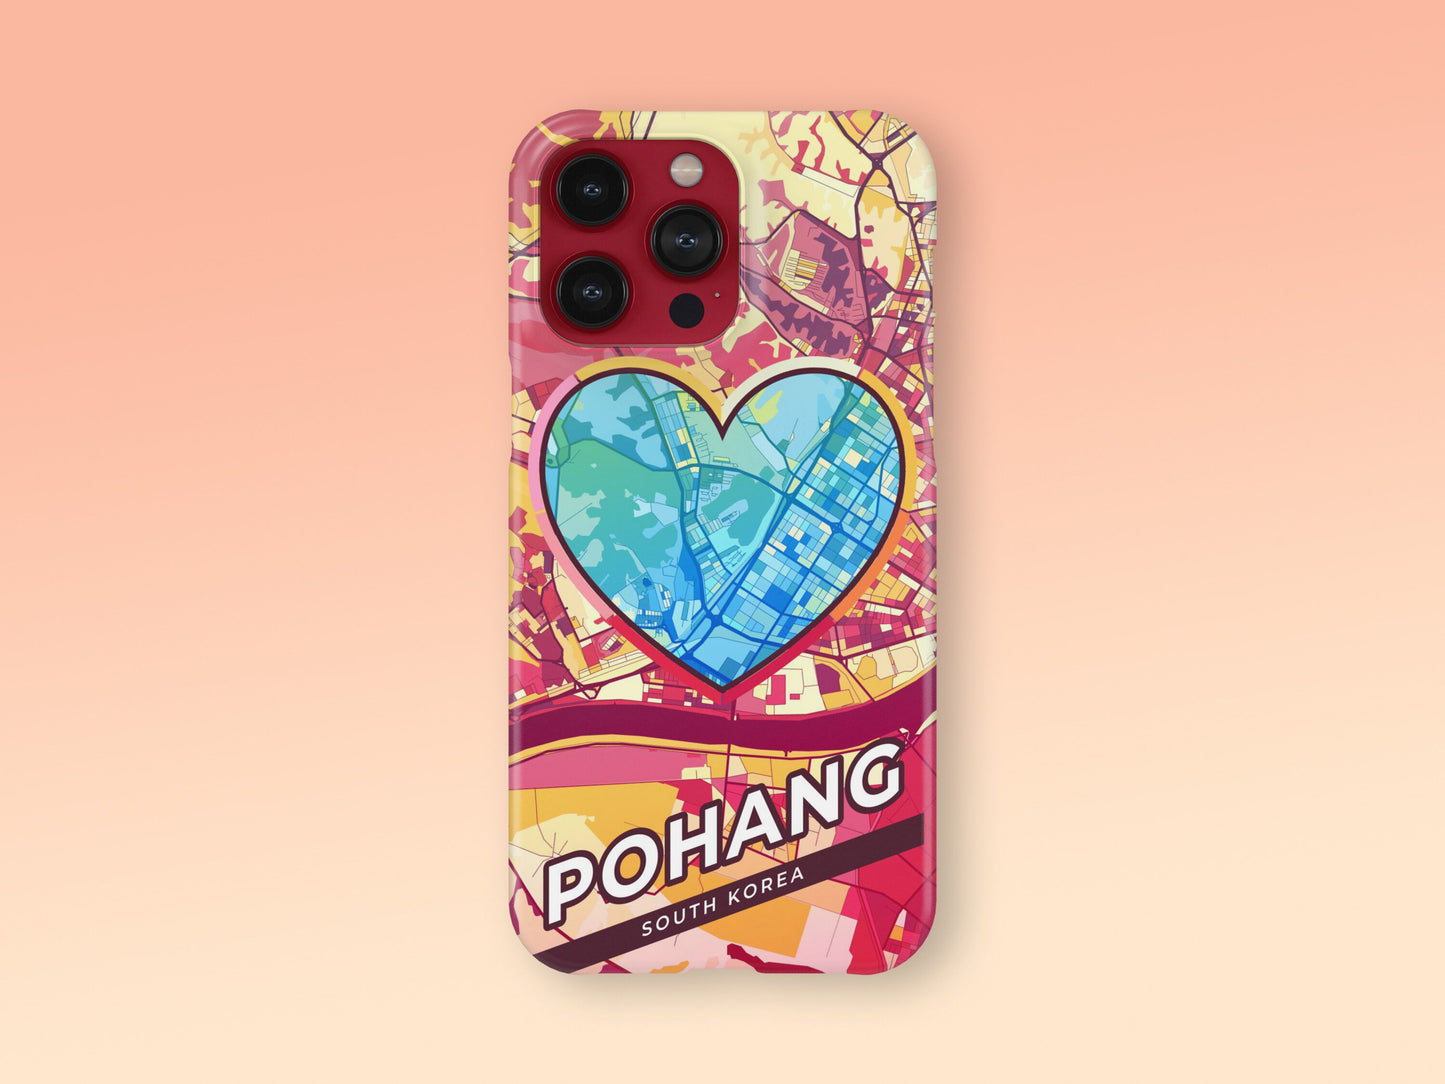 Pohang South Korea slim phone case with colorful icon. Birthday, wedding or housewarming gift. Couple match cases. 2